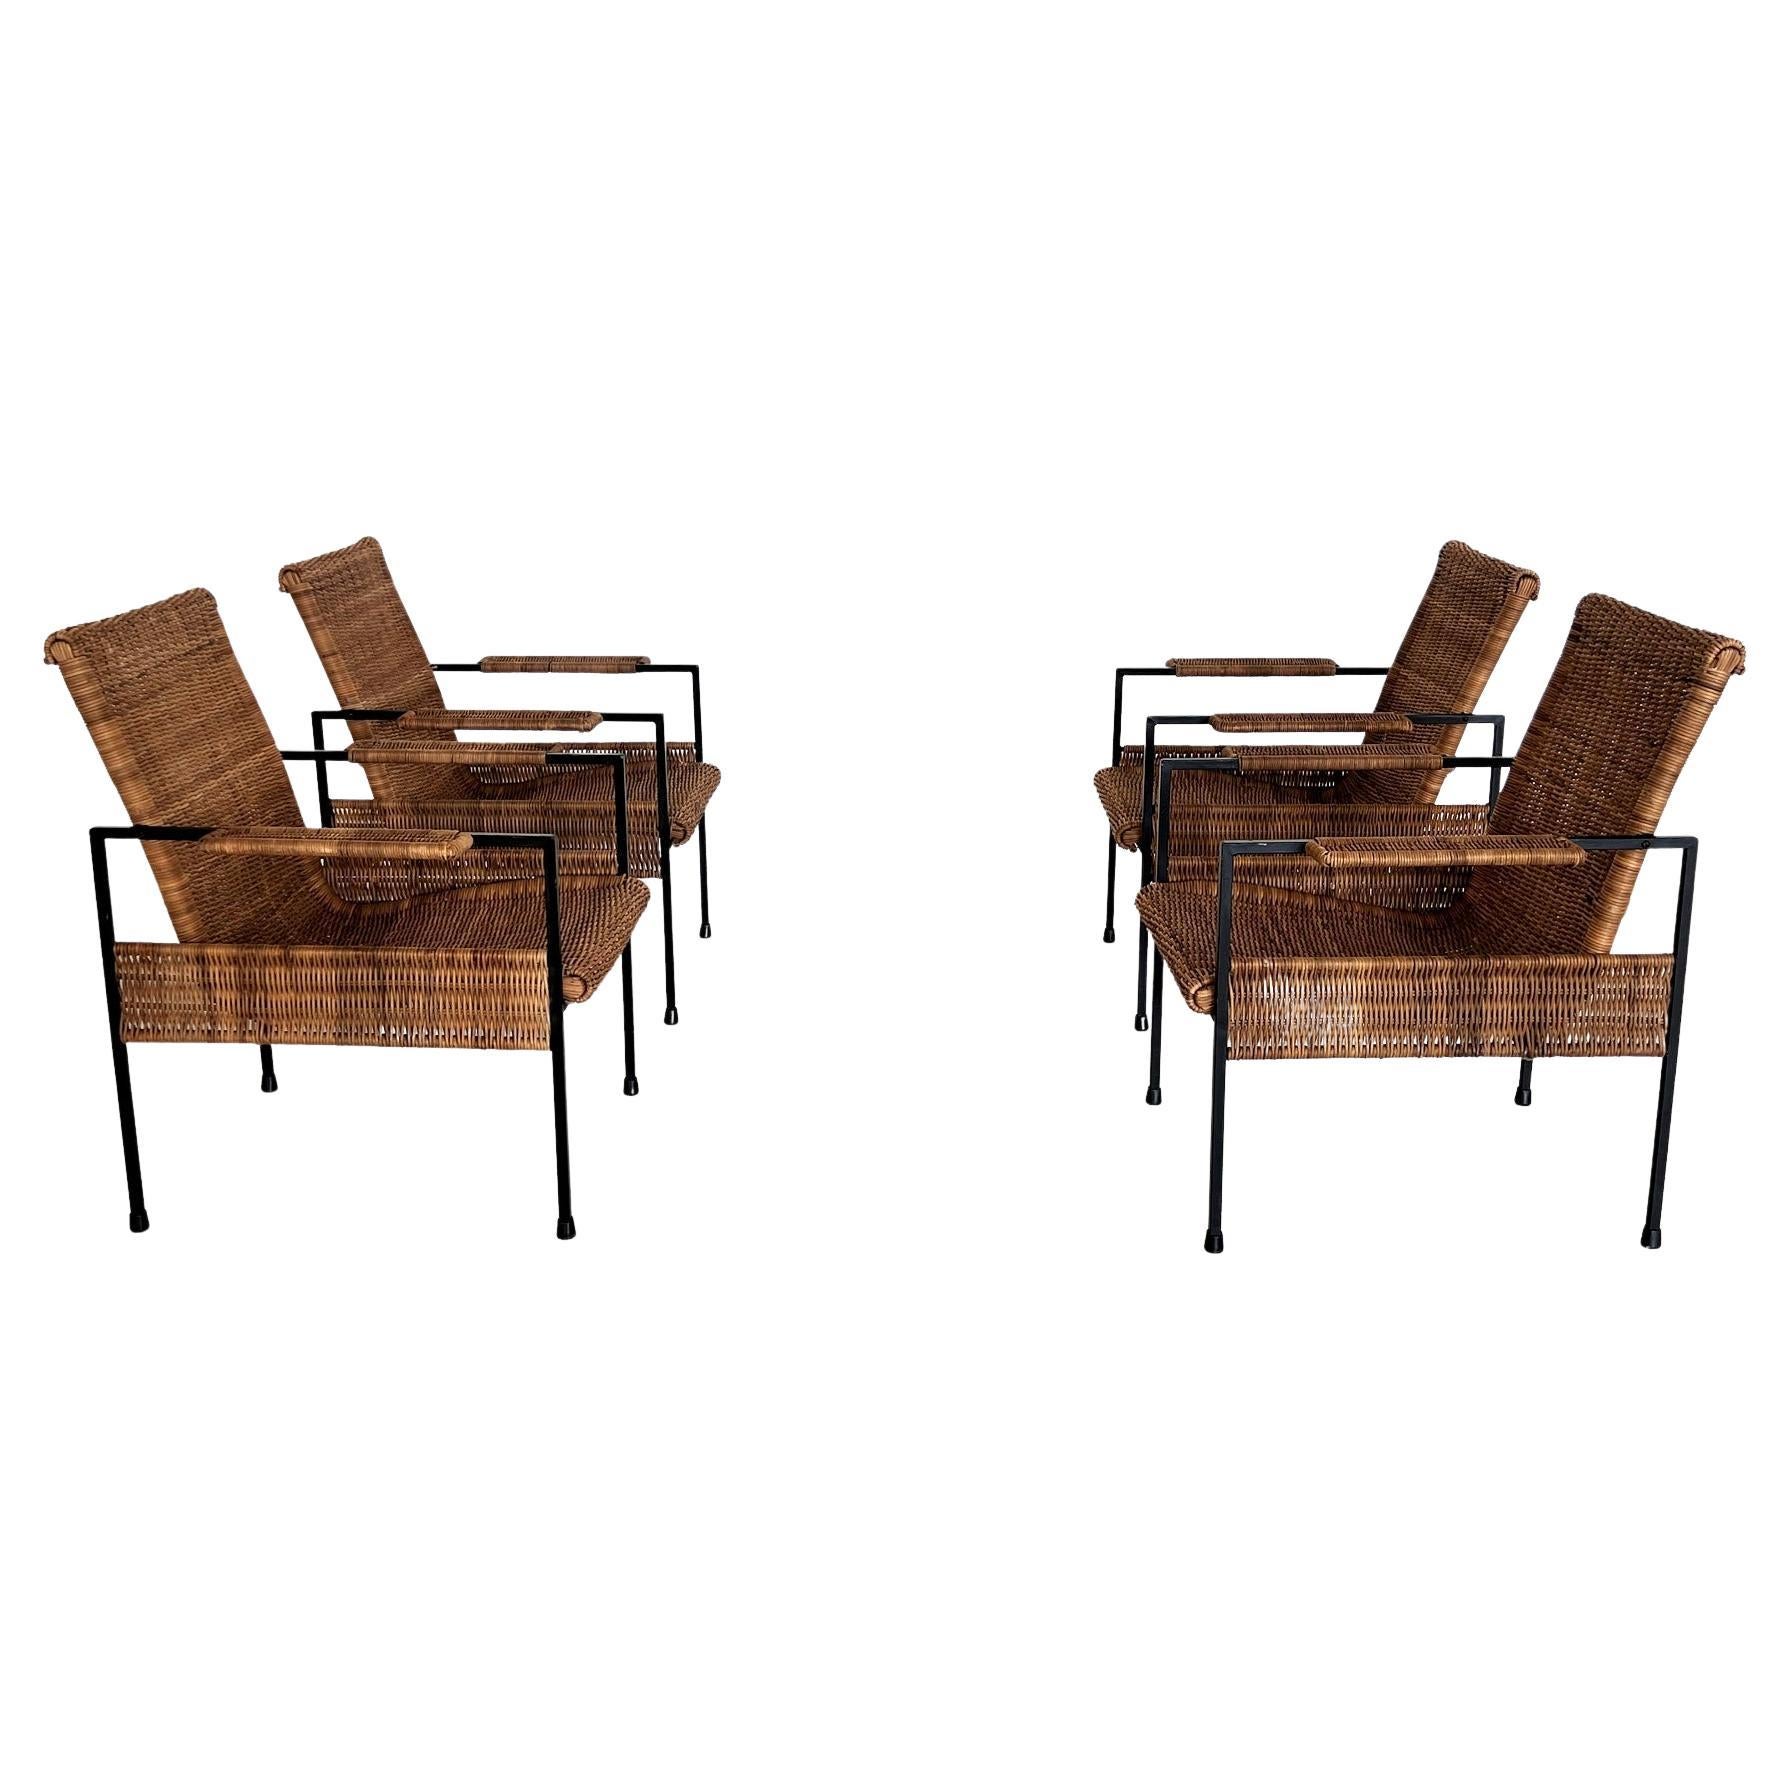 Italian Comfortable Midcentury Rattan Wicker and Iron Lounge Chairs, set of 4 For Sale